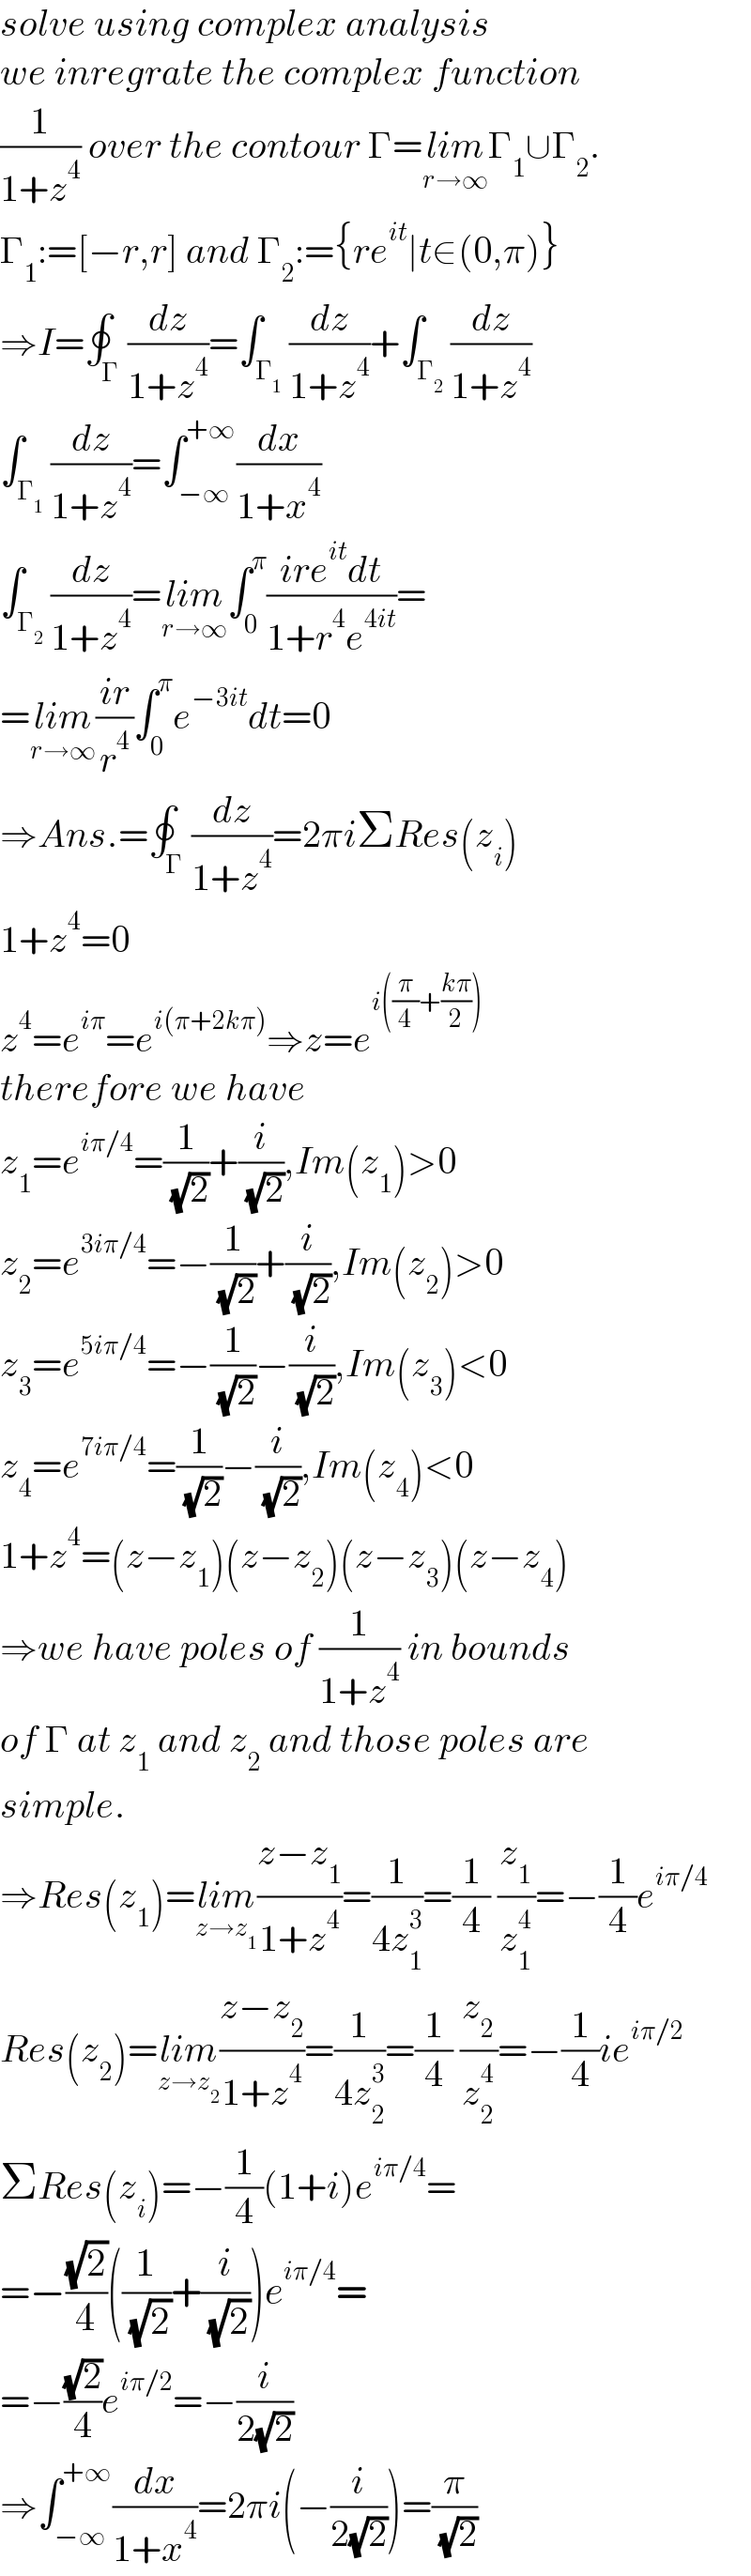 solve using complex analysis  we inregrate the complex function  (1/(1+z^4 )) over the contour Γ=lim_(r→∞) Γ_1 ∪Γ_2 .  Γ_1 :=[−r,r] and Γ_2 :={re^(it) ∣t∈(0,π)}  ⇒I=∮_Γ (dz/(1+z^4 ))=∫_Γ_1  (dz/(1+z^4 ))+∫_Γ_2  (dz/(1+z^4 ))  ∫_Γ_1  (dz/(1+z^4 ))=∫_(−∞) ^(+∞) (dx/(1+x^4 ))  ∫_Γ_2  (dz/(1+z^4 ))=lim_(r→∞) ∫_0 ^π ((ire^(it) dt)/(1+r^4 e^(4it) ))=  =lim_(r→∞) ((ir)/r^4 )∫_0 ^π e^(−3it) dt=0  ⇒Ans.=∮_Γ (dz/(1+z^4 ))=2πiΣRes(z_i )  1+z^4 =0  z^4 =e^(iπ) =e^(i(π+2kπ)) ⇒z=e^(i((π/4)+((kπ)/2)))   therefore we have  z_1 =e^(iπ/4) =(1/( (√2)))+(i/( (√2))),Im(z_1 )>0  z_2 =e^(3iπ/4) =−(1/( (√2)))+(i/( (√2))),Im(z_2 )>0  z_3 =e^(5iπ/4) =−(1/( (√2)))−(i/( (√2))),Im(z_3 )<0  z_4 =e^(7iπ/4) =(1/( (√2)))−(i/( (√2))),Im(z_4 )<0  1+z^4 =(z−z_1 )(z−z_2 )(z−z_3 )(z−z_4 )  ⇒we have poles of (1/(1+z^4 )) in bounds  of Γ at z_1  and z_2  and those poles are  simple.  ⇒Res(z_1 )=lim_(z→z_1 ) ((z−z_1 )/(1+z^4 ))=(1/(4z_1 ^3 ))=(1/4) (z_1 /z_1 ^4 )=−(1/4)e^(iπ/4)   Res(z_2 )=lim_(z→z_2 ) ((z−z_2 )/(1+z^4 ))=(1/(4z_2 ^3 ))=(1/4) (z_2 /z_2 ^4 )=−(1/4)ie^(iπ/2)   ΣRes(z_i )=−(1/4)(1+i)e^(iπ/4) =  =−((√2)/4)((1/( (√2)))+(i/( (√2))))e^(iπ/4) =  =−((√2)/4)e^(iπ/2) =−(i/(2(√2)))  ⇒∫_(−∞) ^(+∞) (dx/(1+x^4 ))=2πi(−(i/(2(√2))))=(π/( (√2)))  